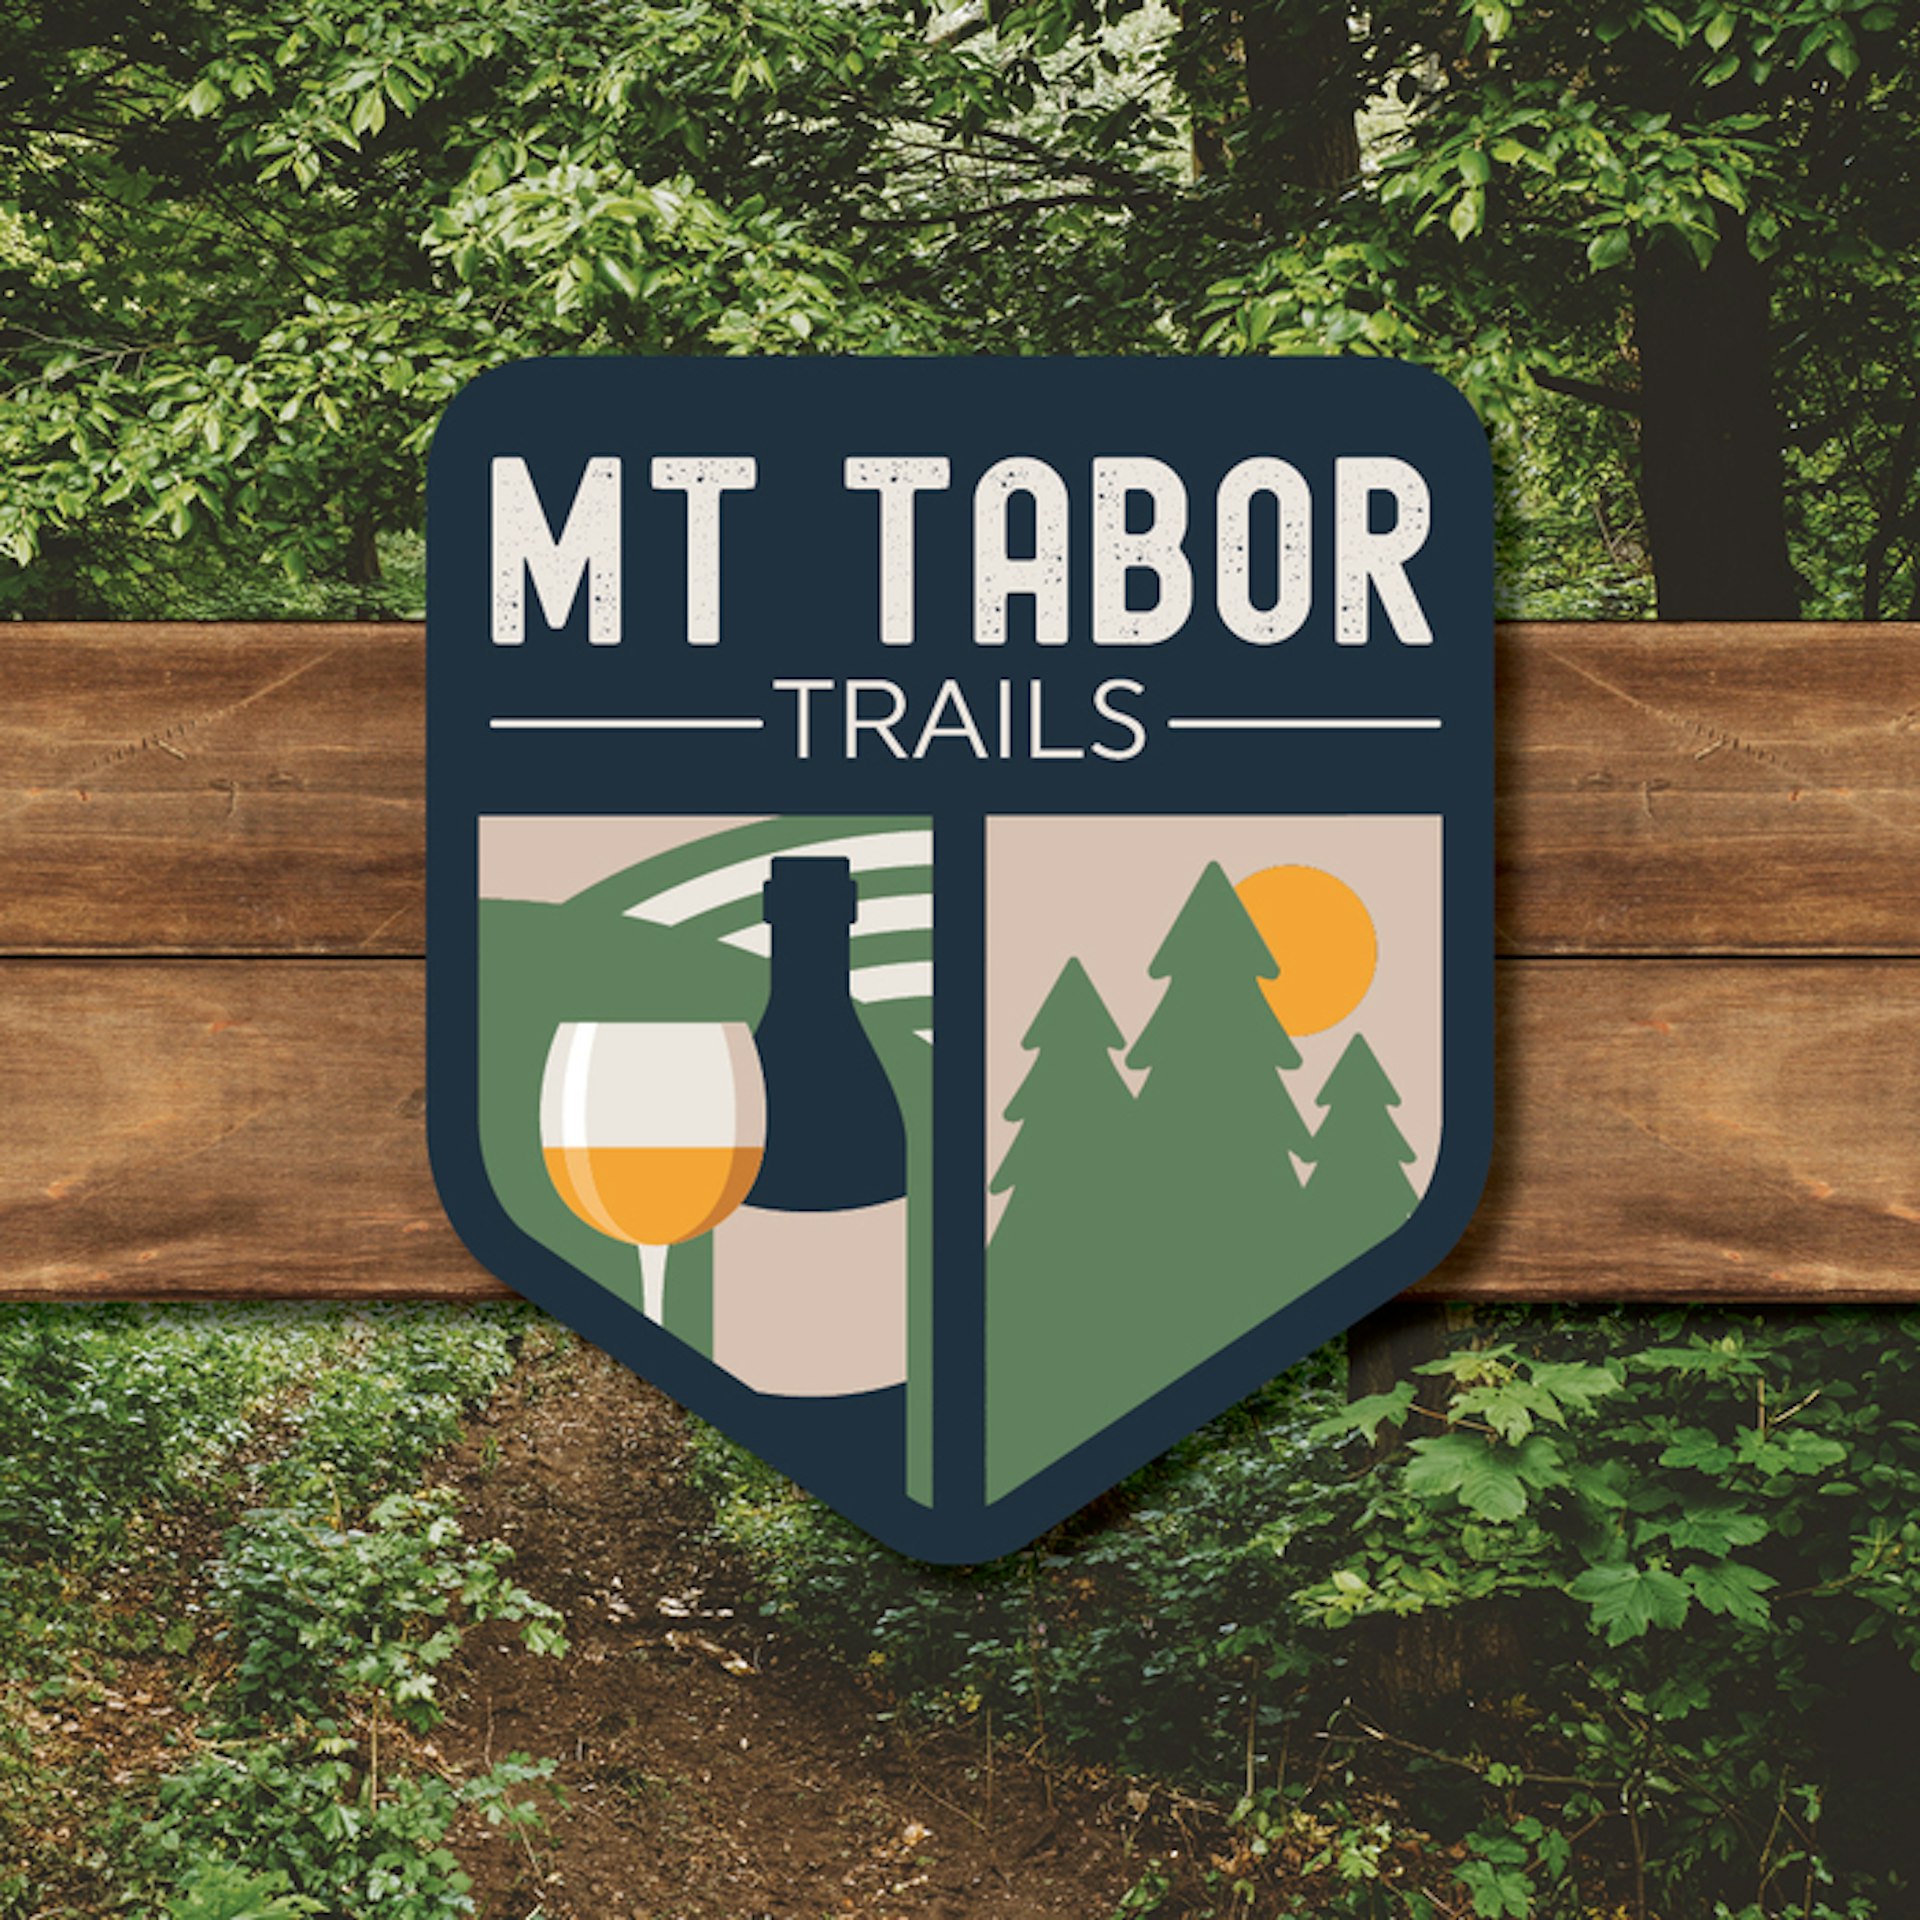 A sign reading "Mt Tabor Trails"